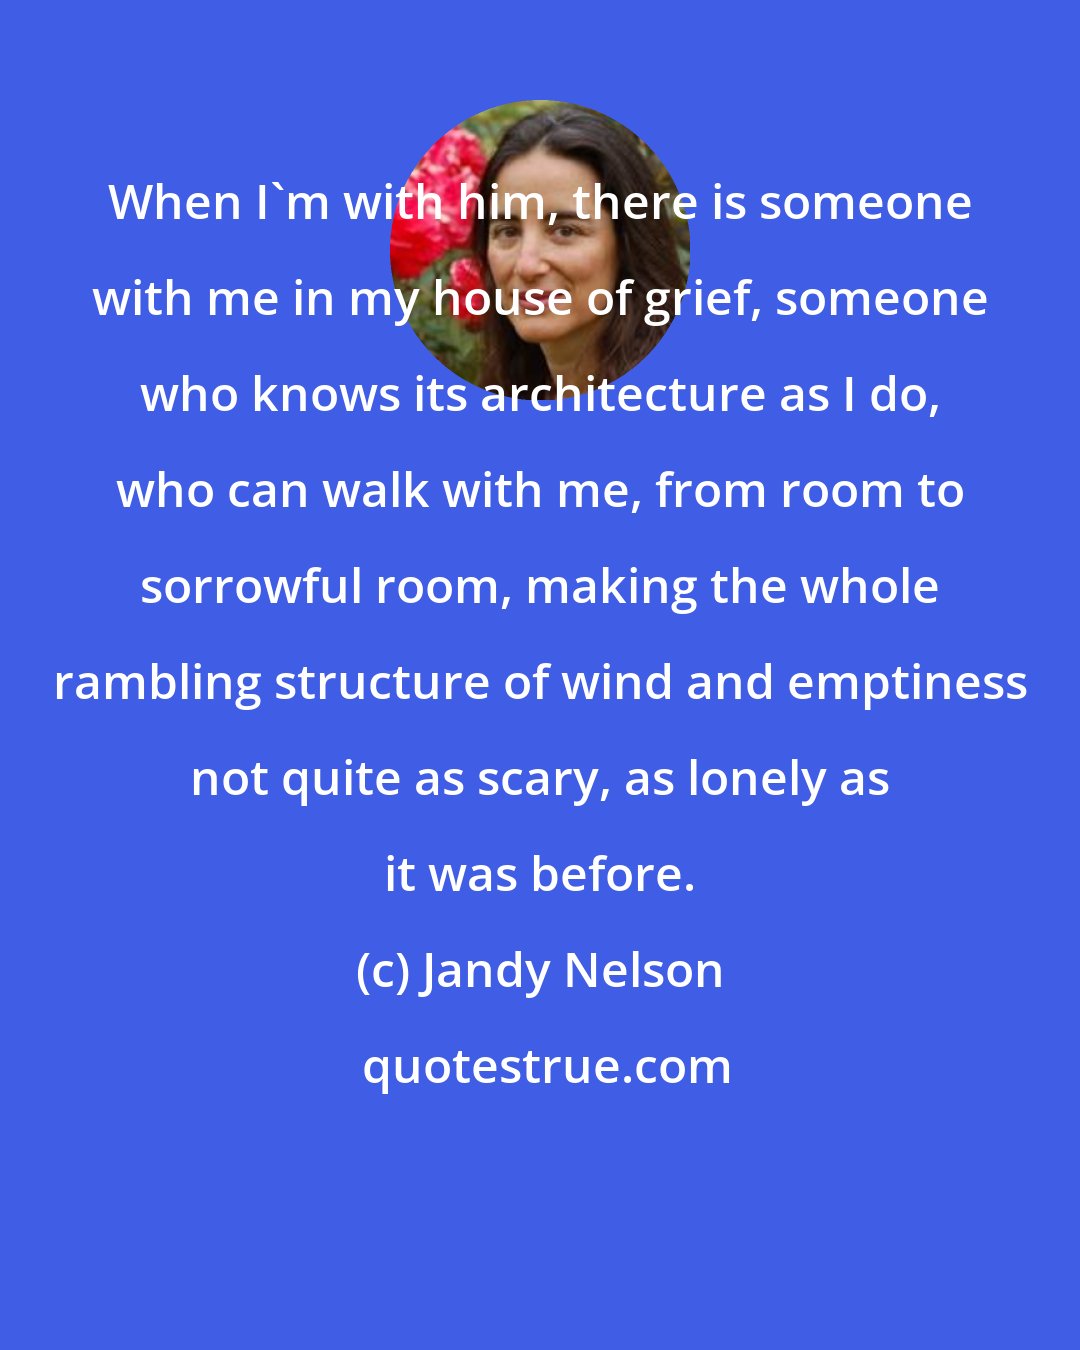 Jandy Nelson: When I'm with him, there is someone with me in my house of grief, someone who knows its architecture as I do, who can walk with me, from room to sorrowful room, making the whole rambling structure of wind and emptiness not quite as scary, as lonely as it was before.